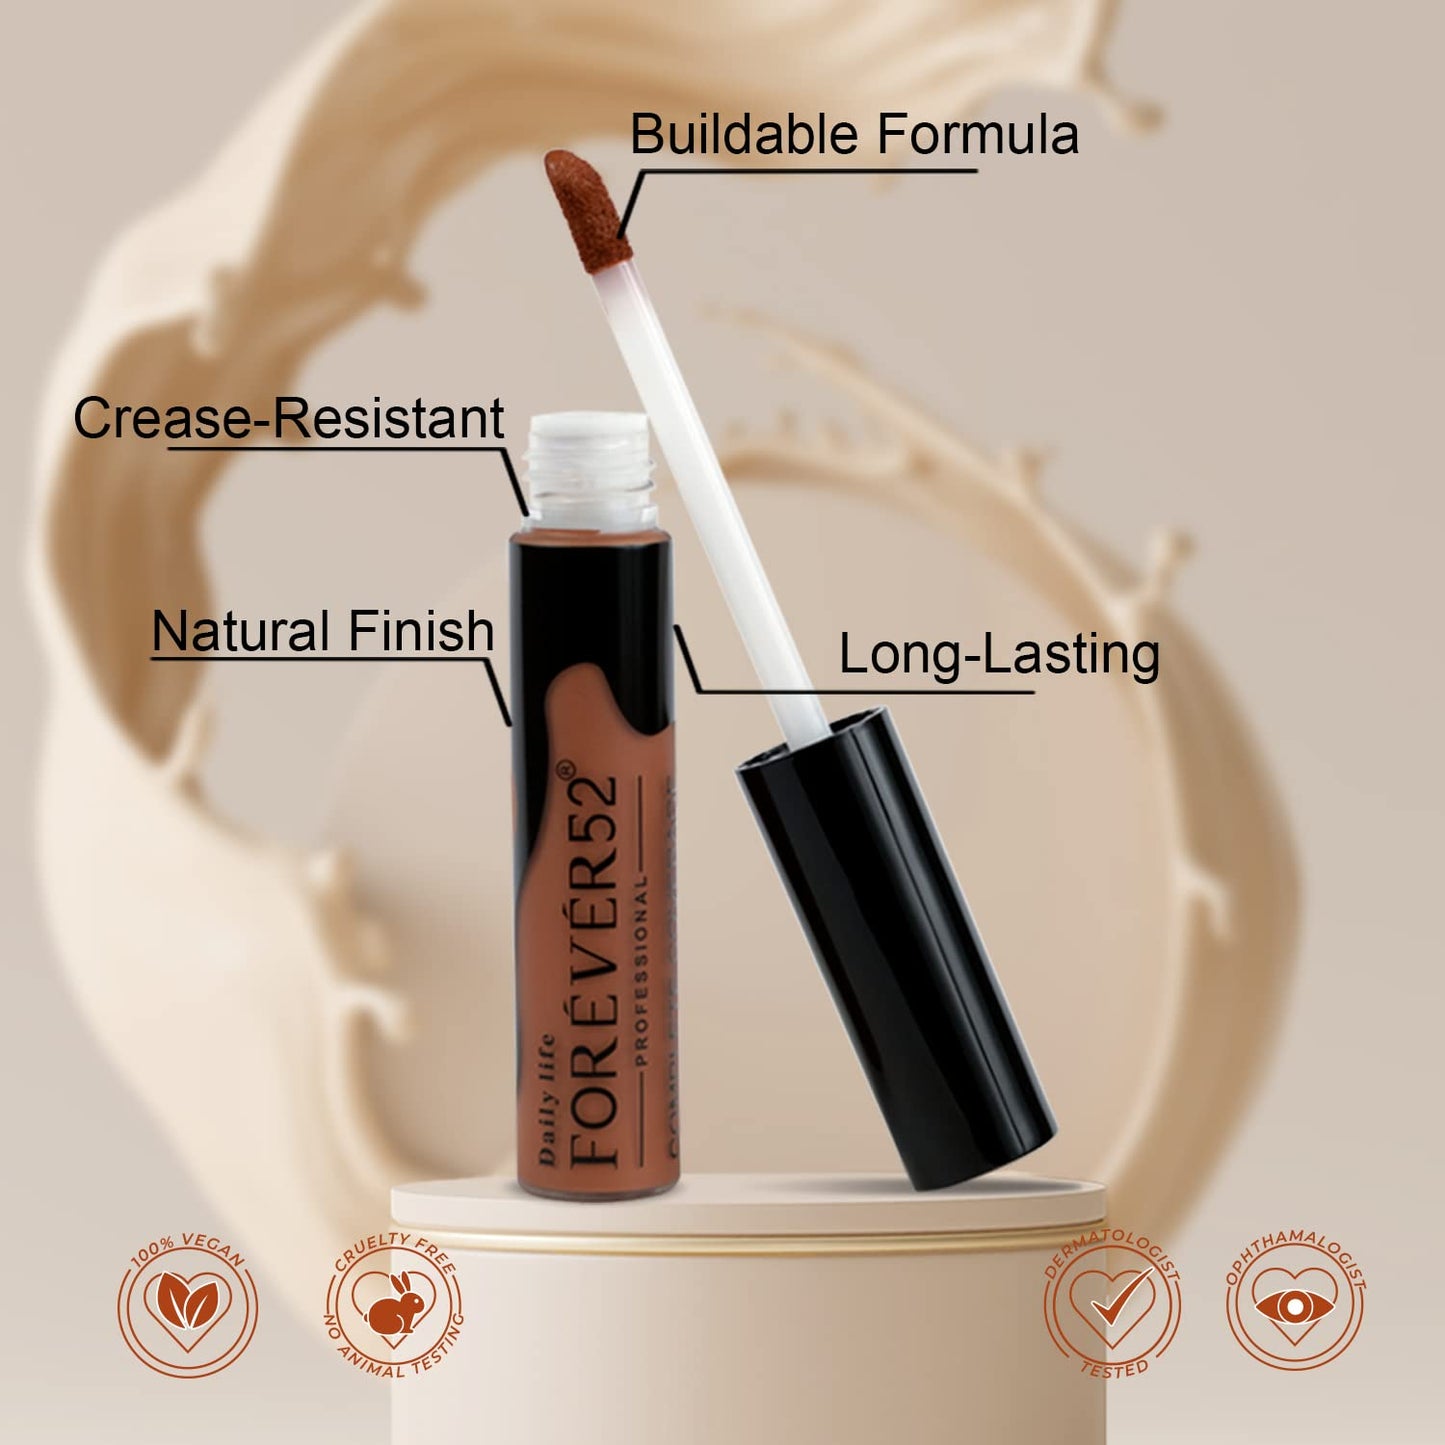 Daily Life Forever52 Easily Blendable Concealer for Face Makeup (Chocolate) Natural finish,Liquid Light Weight Concealer-COV011  from Forever52